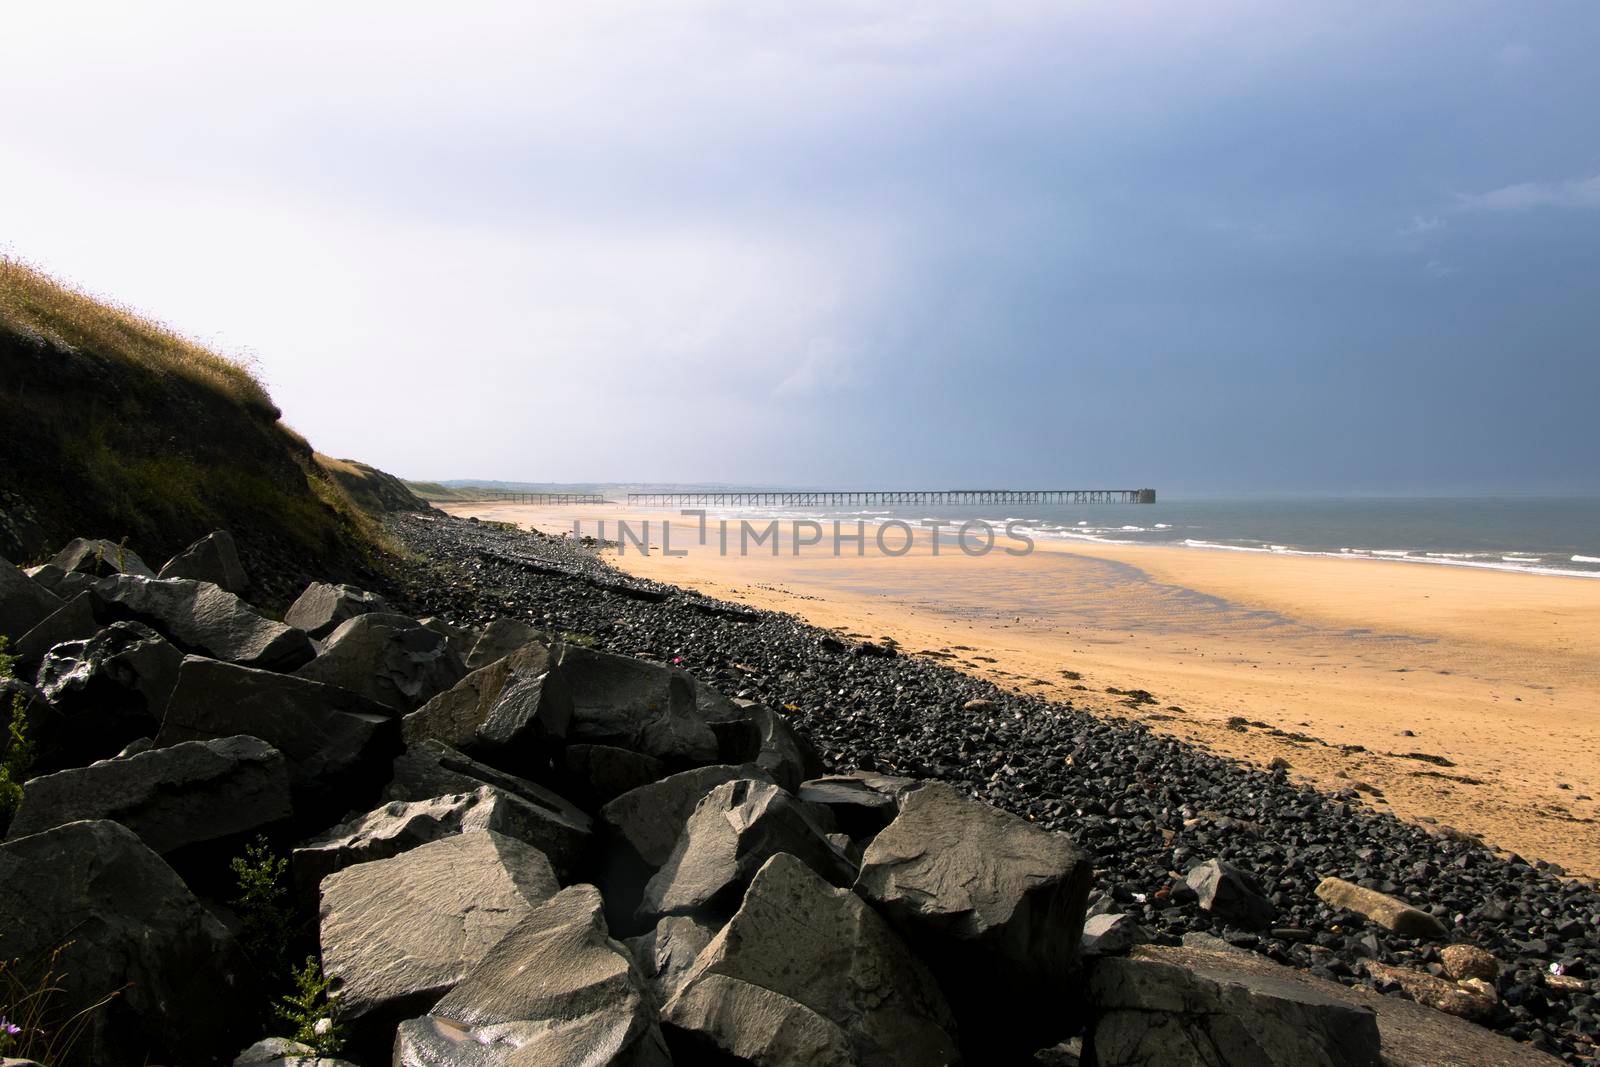 Small cliff of dark rocks of varying sizes in the foreground with yellow and black sand on a beach in Hartlepool, north sea coastline. Grey skies and clouds indicate a storm coming in. Canon EOS 90D.